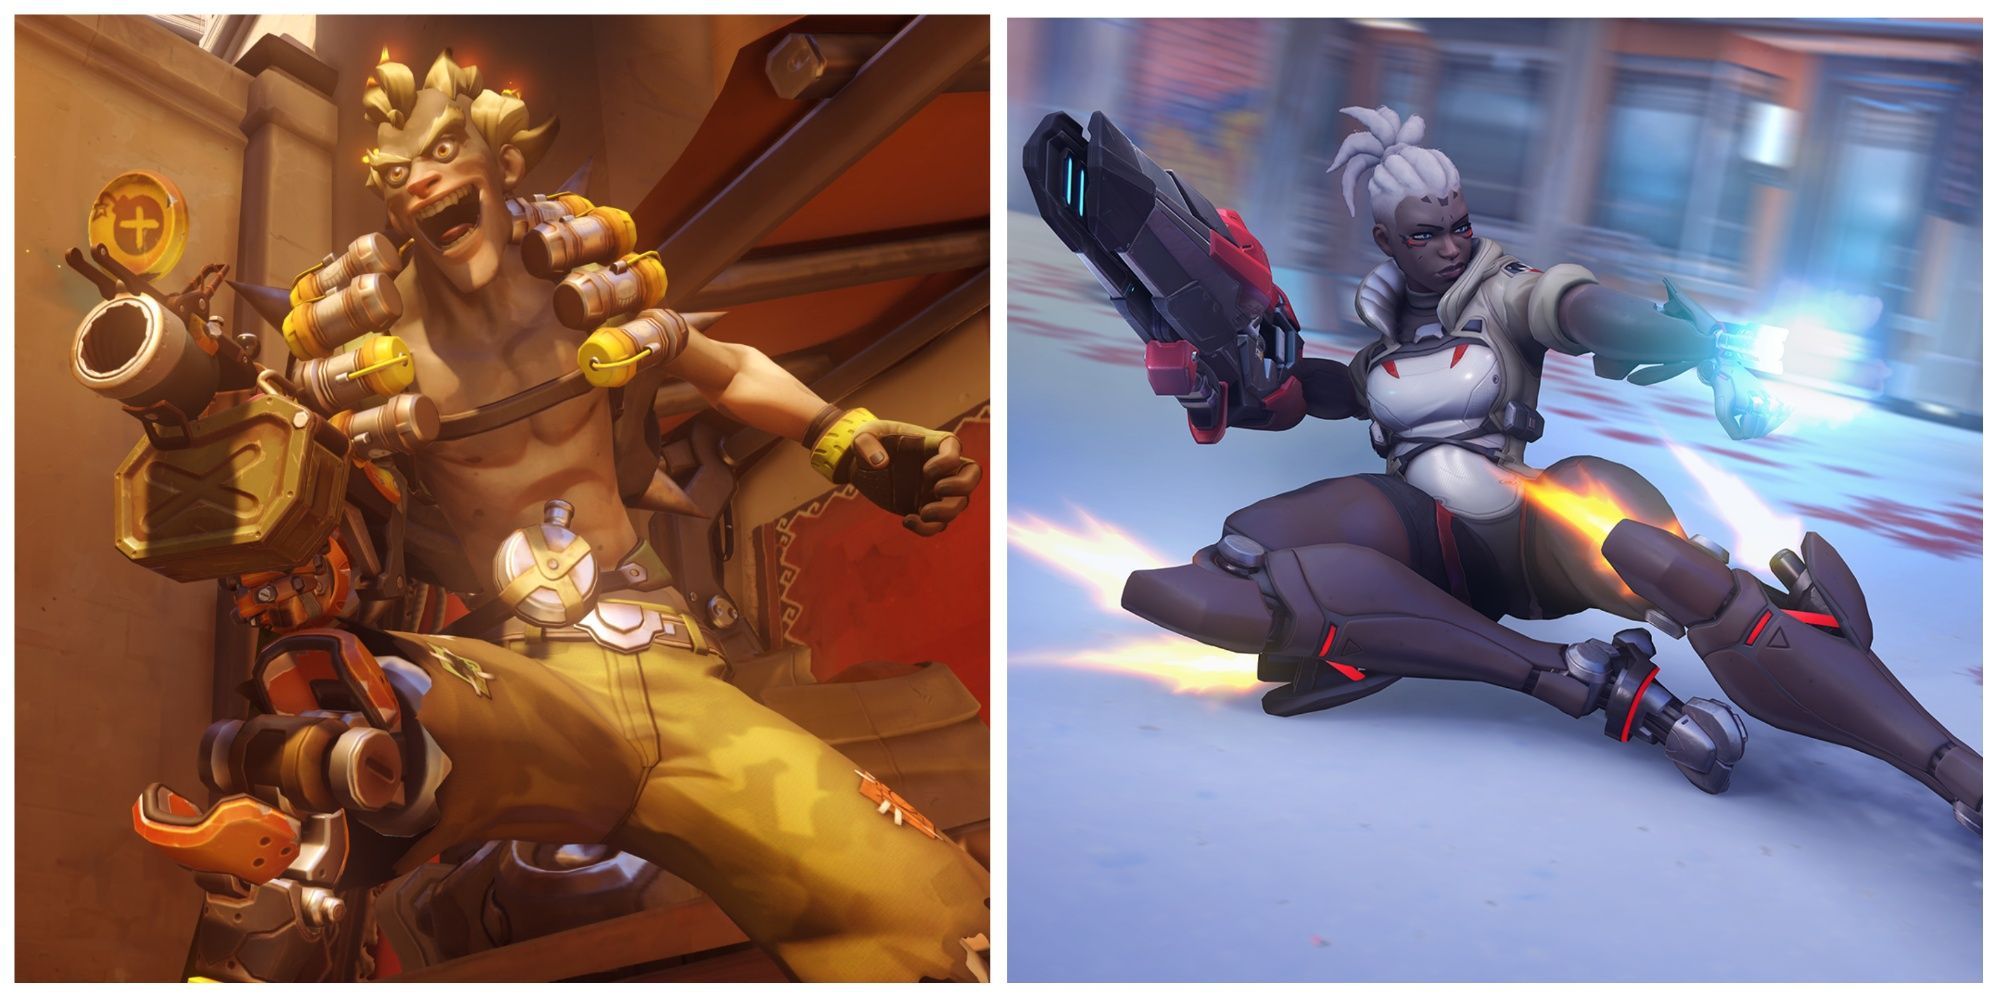 Overwatch 2 screenshot of characters Junkrat (left) and Sojourn (right)